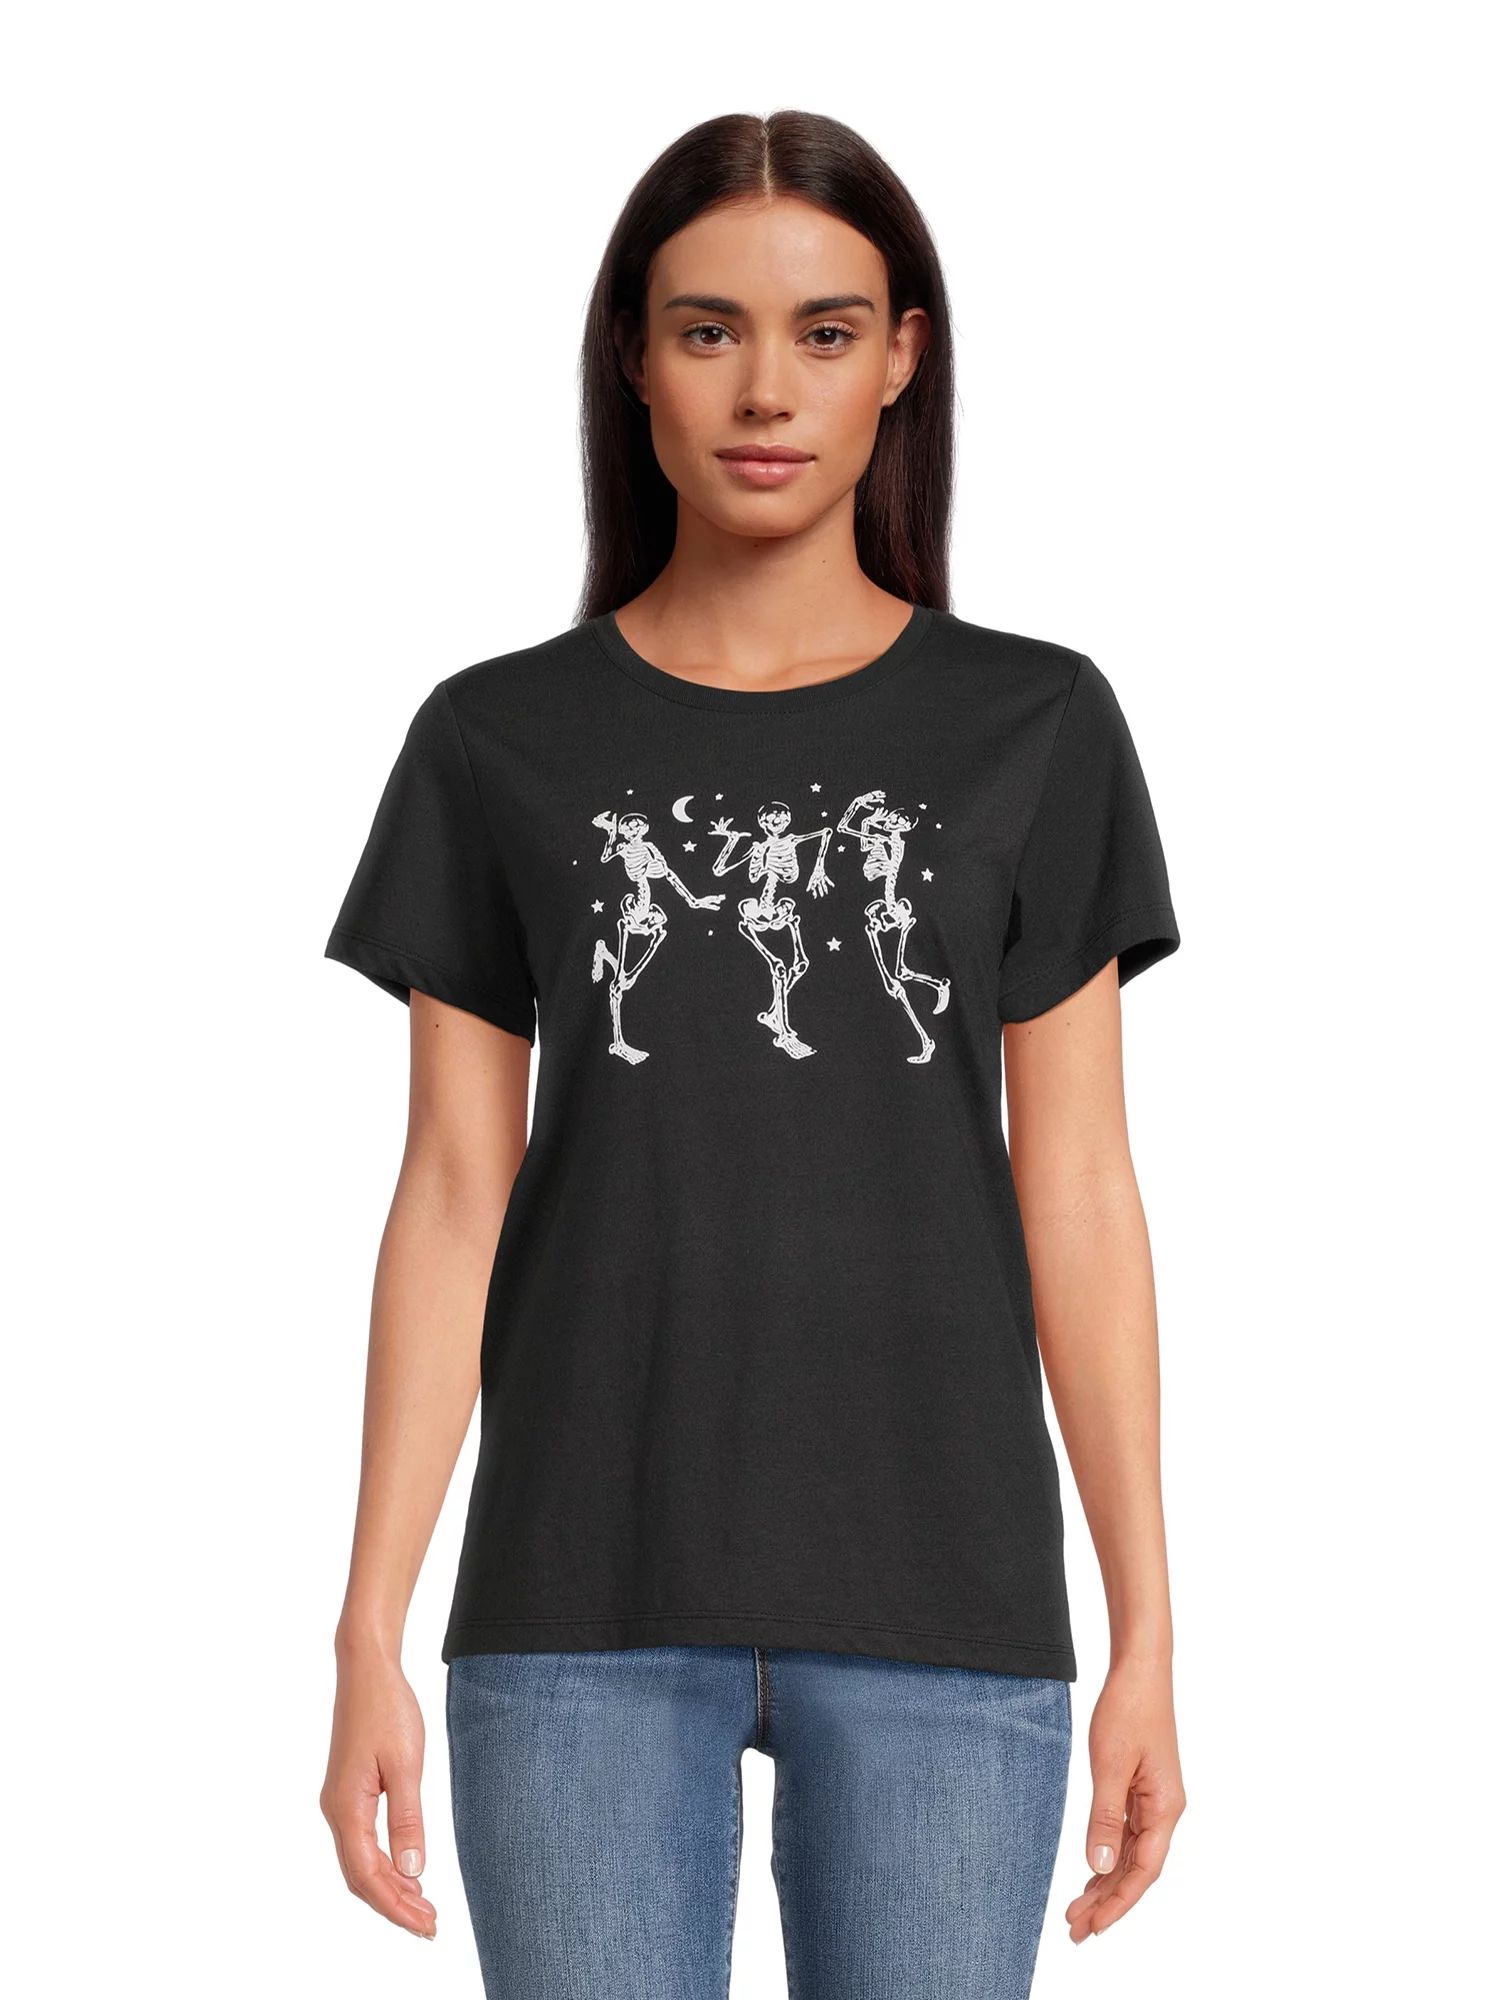 Women's Halloween Skeleton Graphic Tee, Fall Short Sleeve T Shirt from Way to Celebrate, Sizes S-... | Walmart (US)